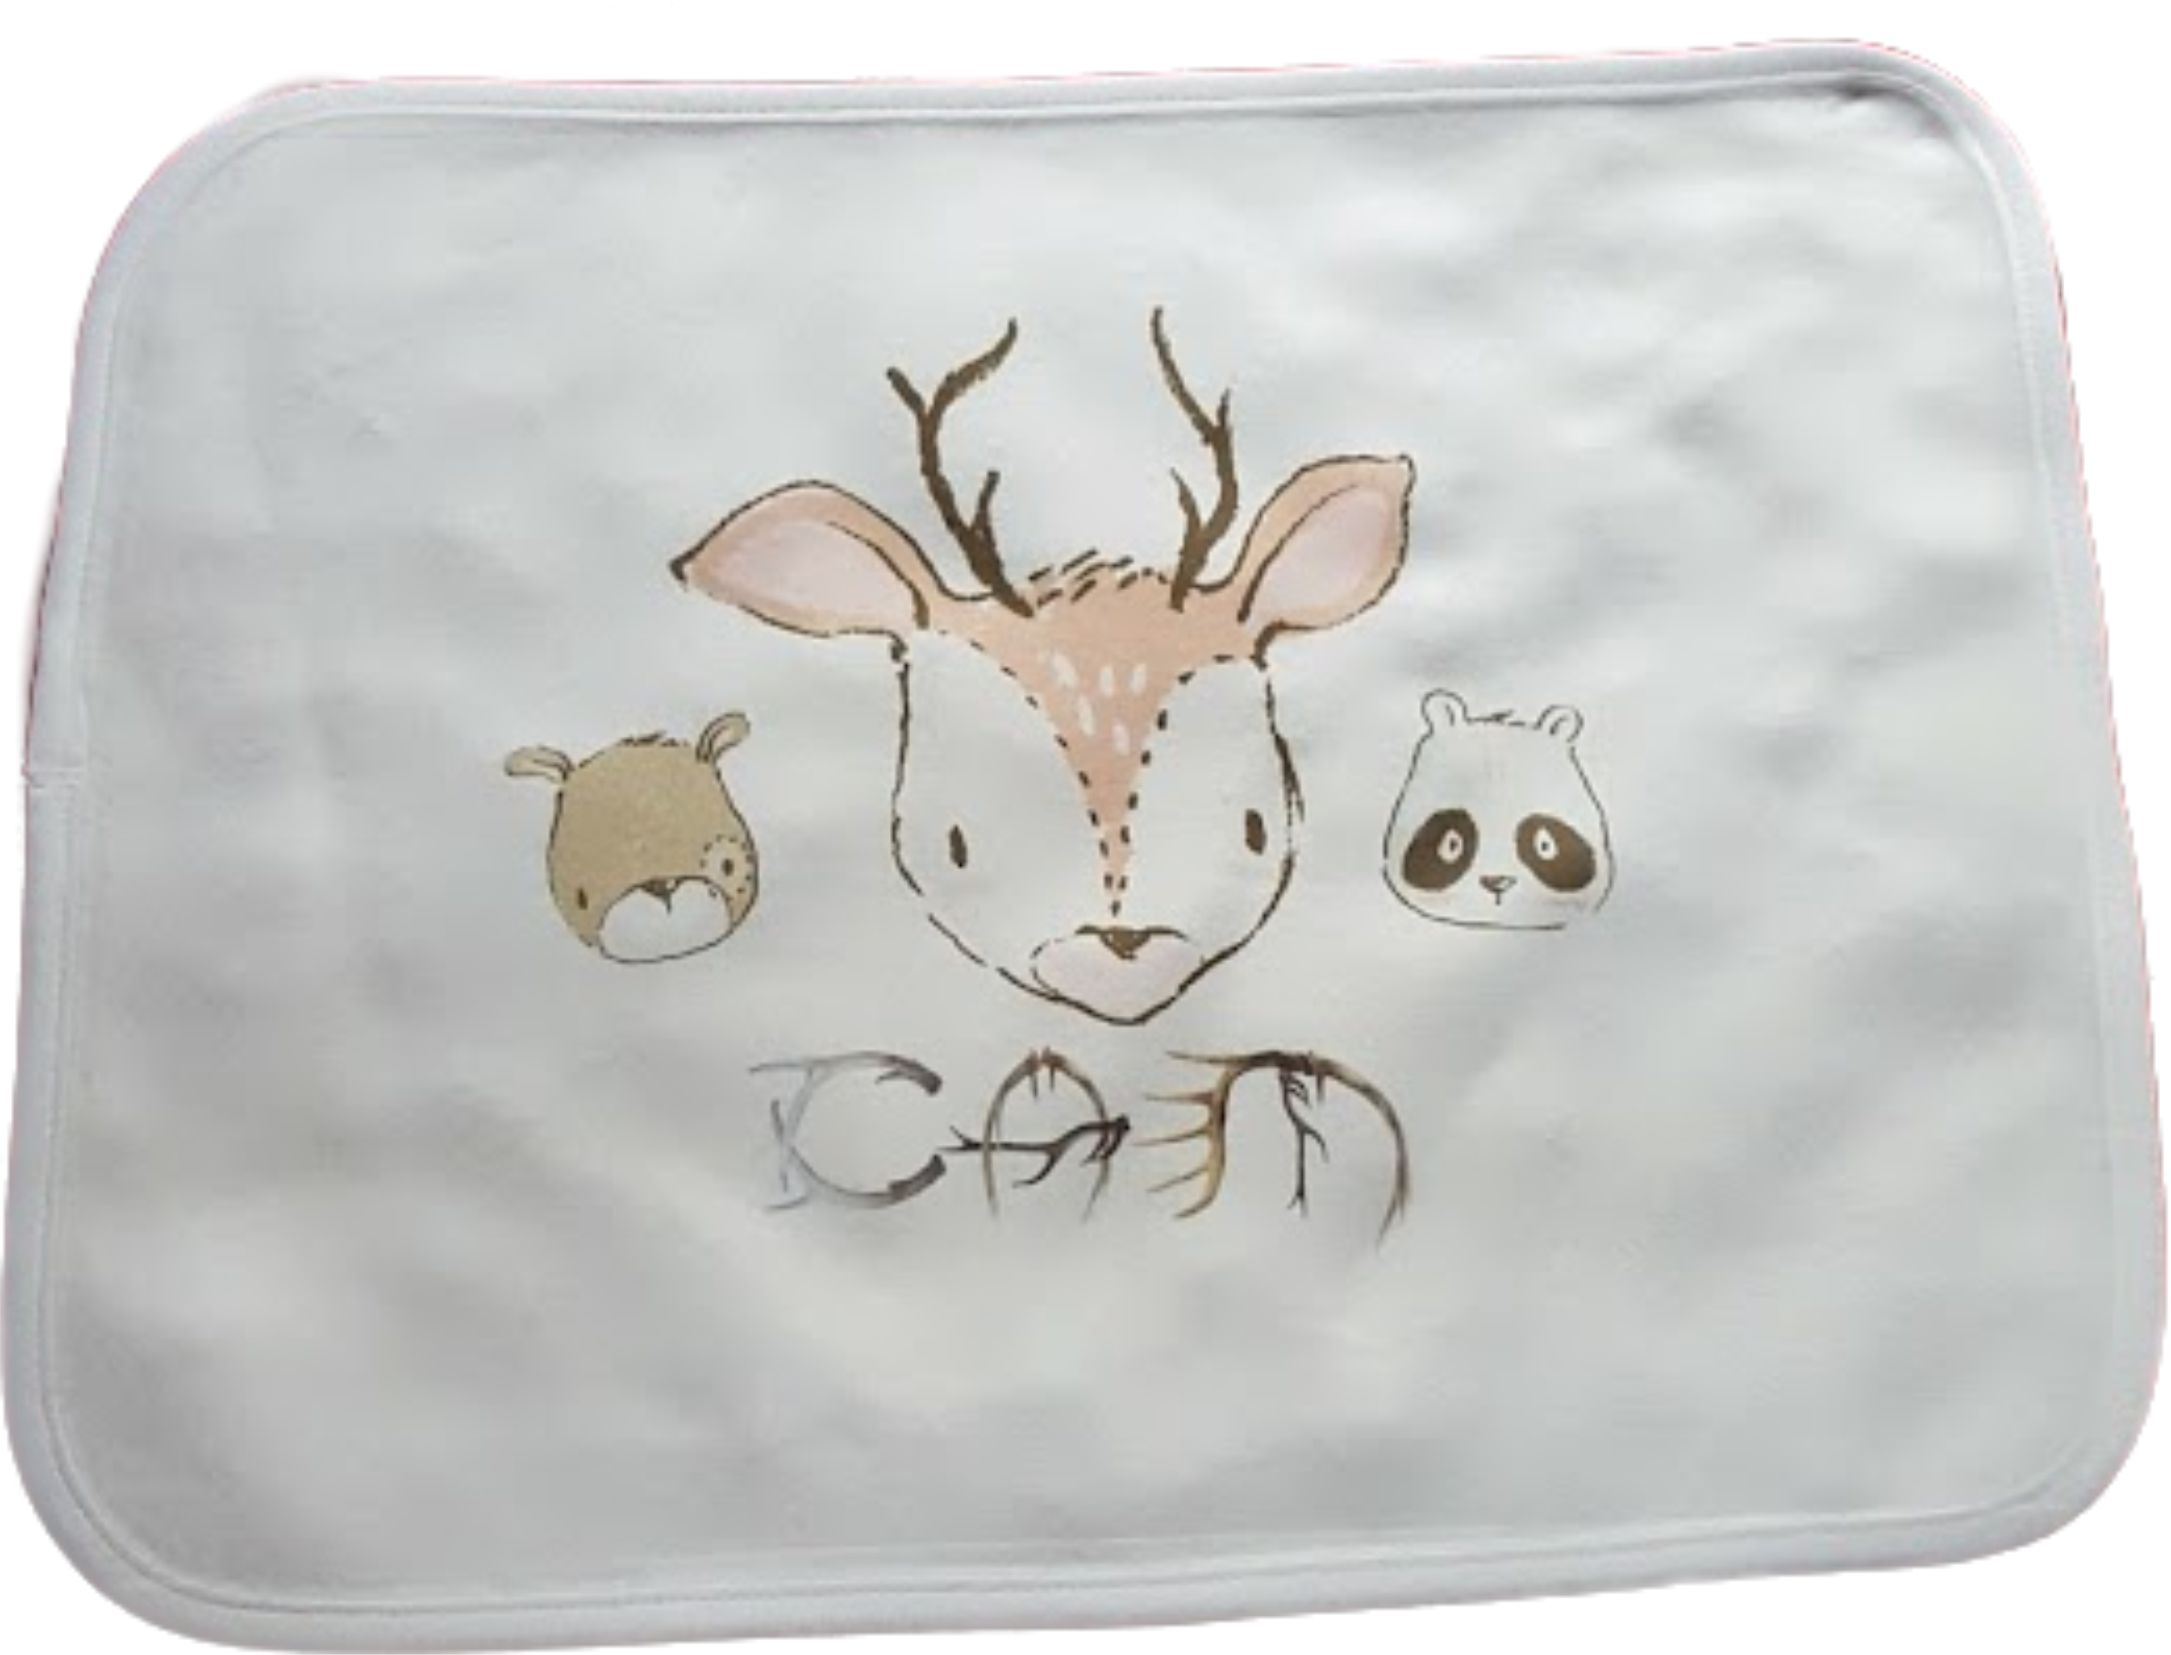 Woodland Animals Burp Cloth made with sublimation printing